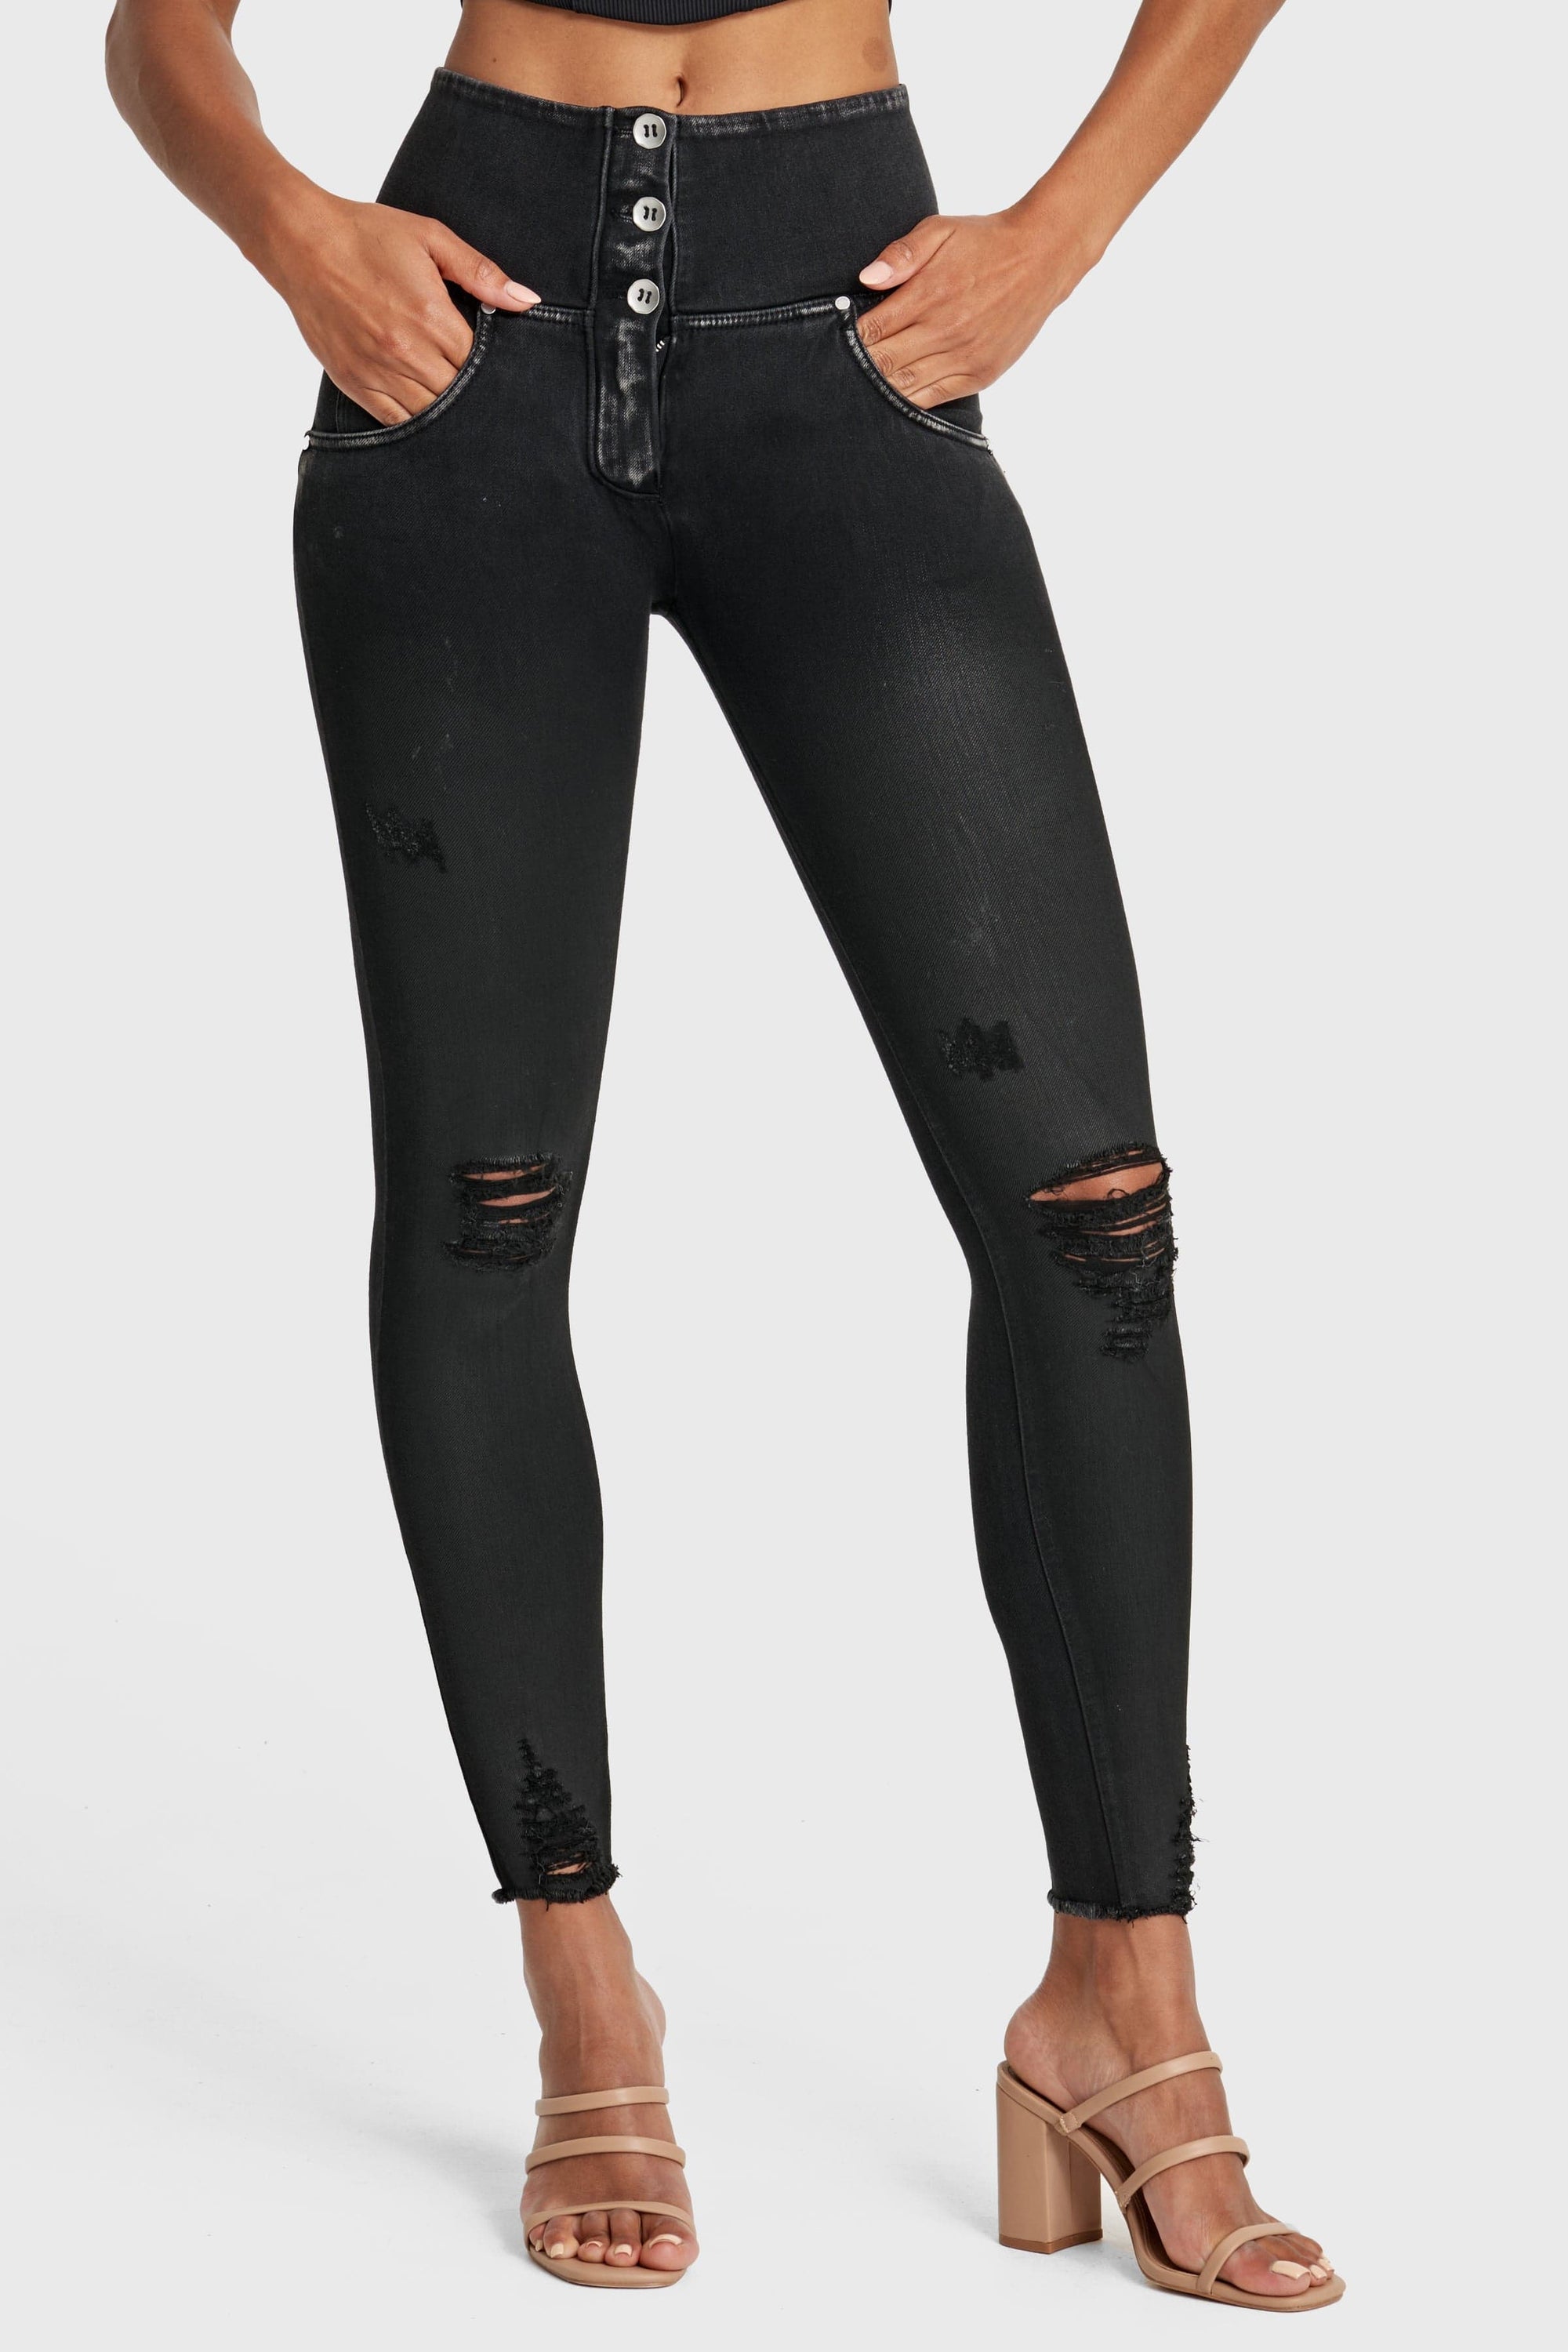 WR.UP® Snug Ripped Jeans - High Waisted - Full Length - Coated Black + Black Stitching 4